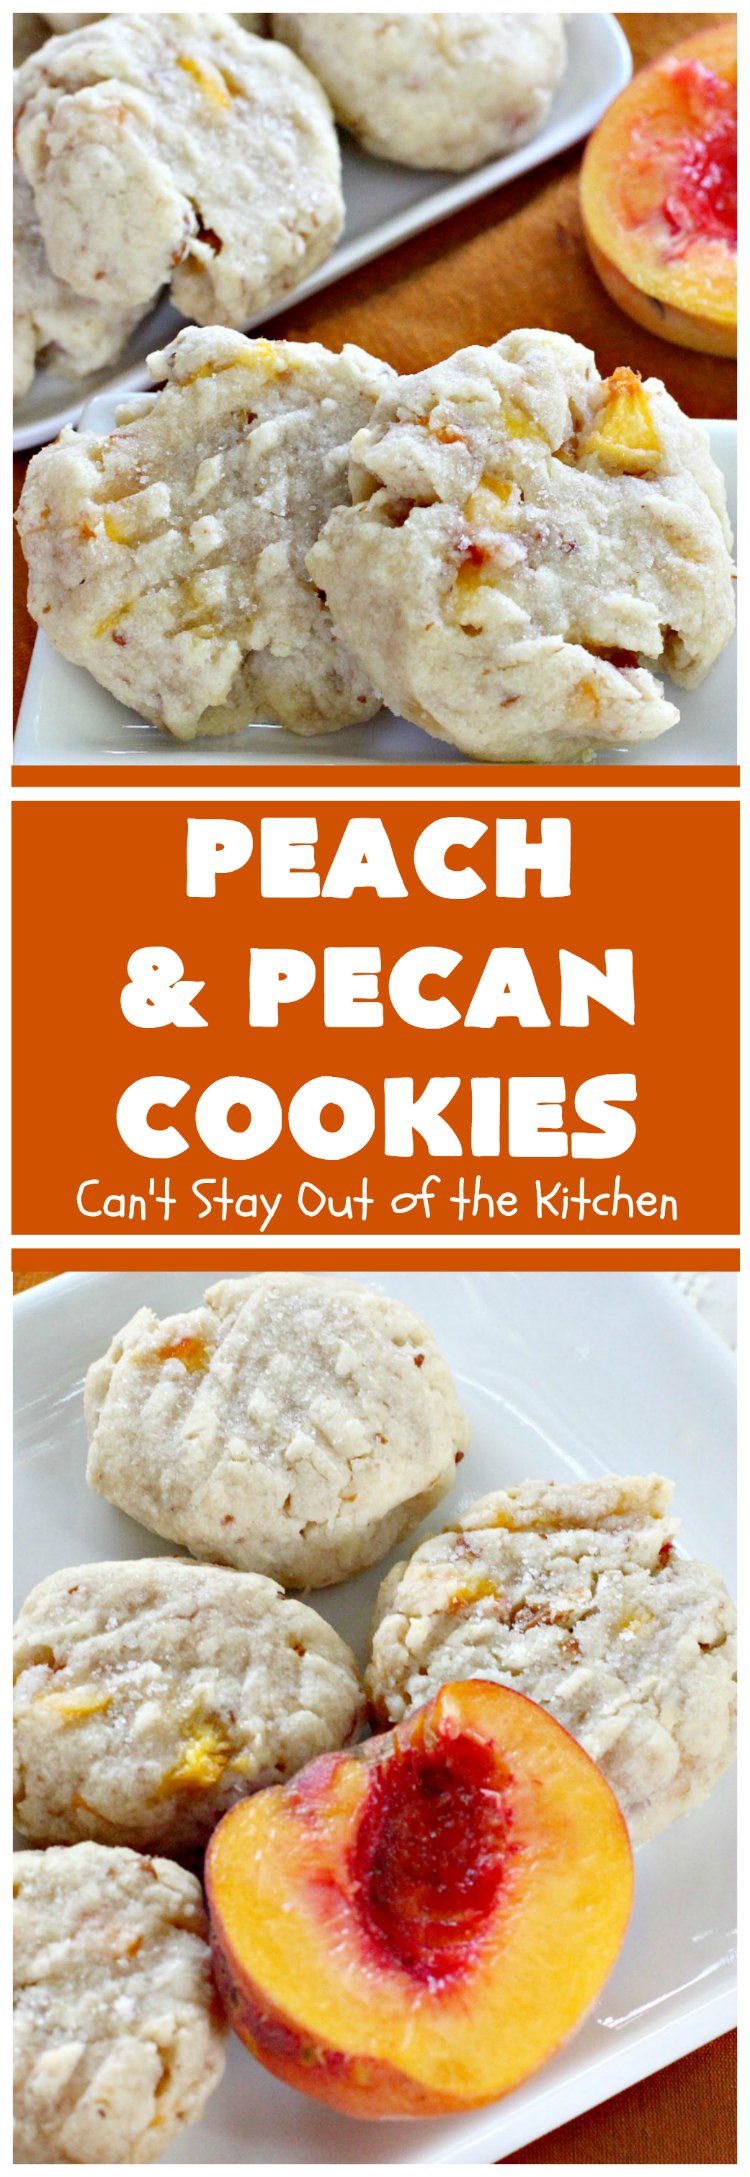 Peach and Pecan Cookies | Can't Stay Out of the KitchenPeach and Pecan Cookies | Can't Stay Out of the Kitchen